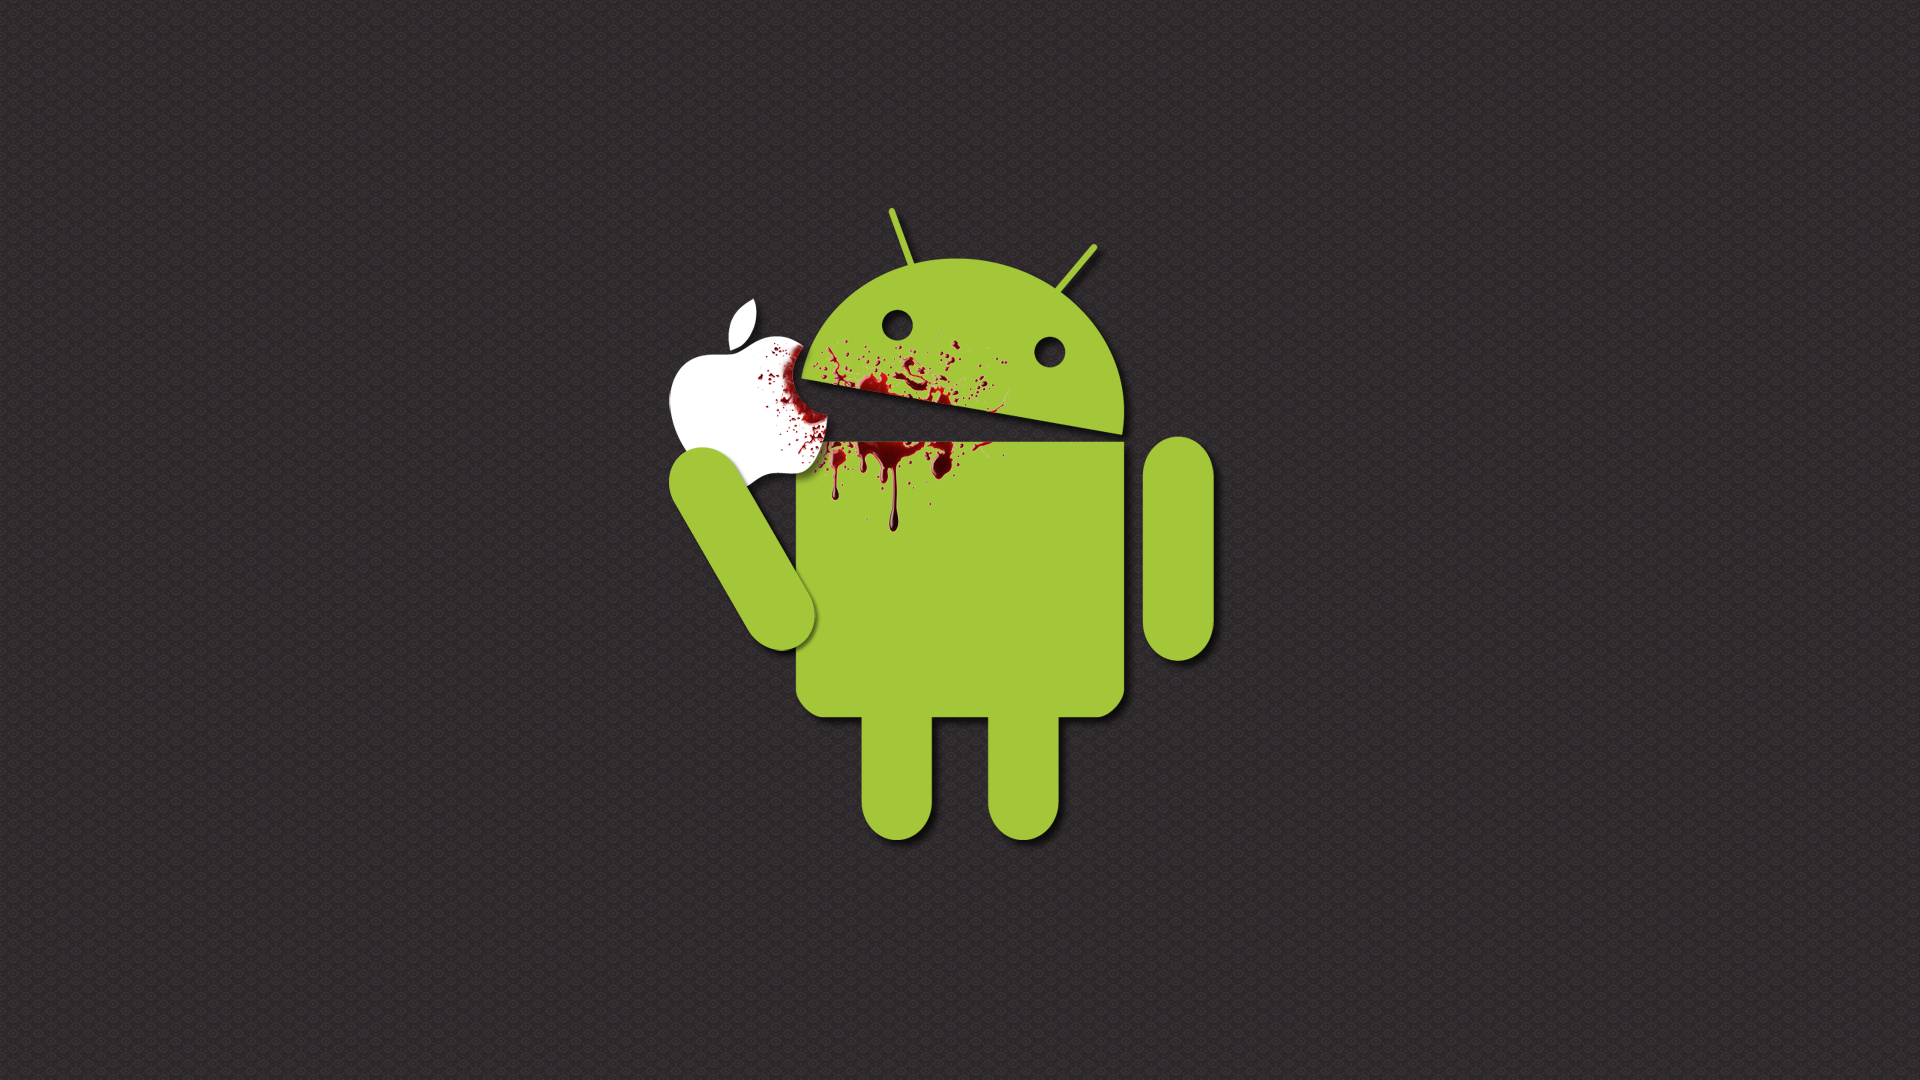 General 1920x1080 Android (operating system) Apple Inc. robot simple background minimalism humor blood